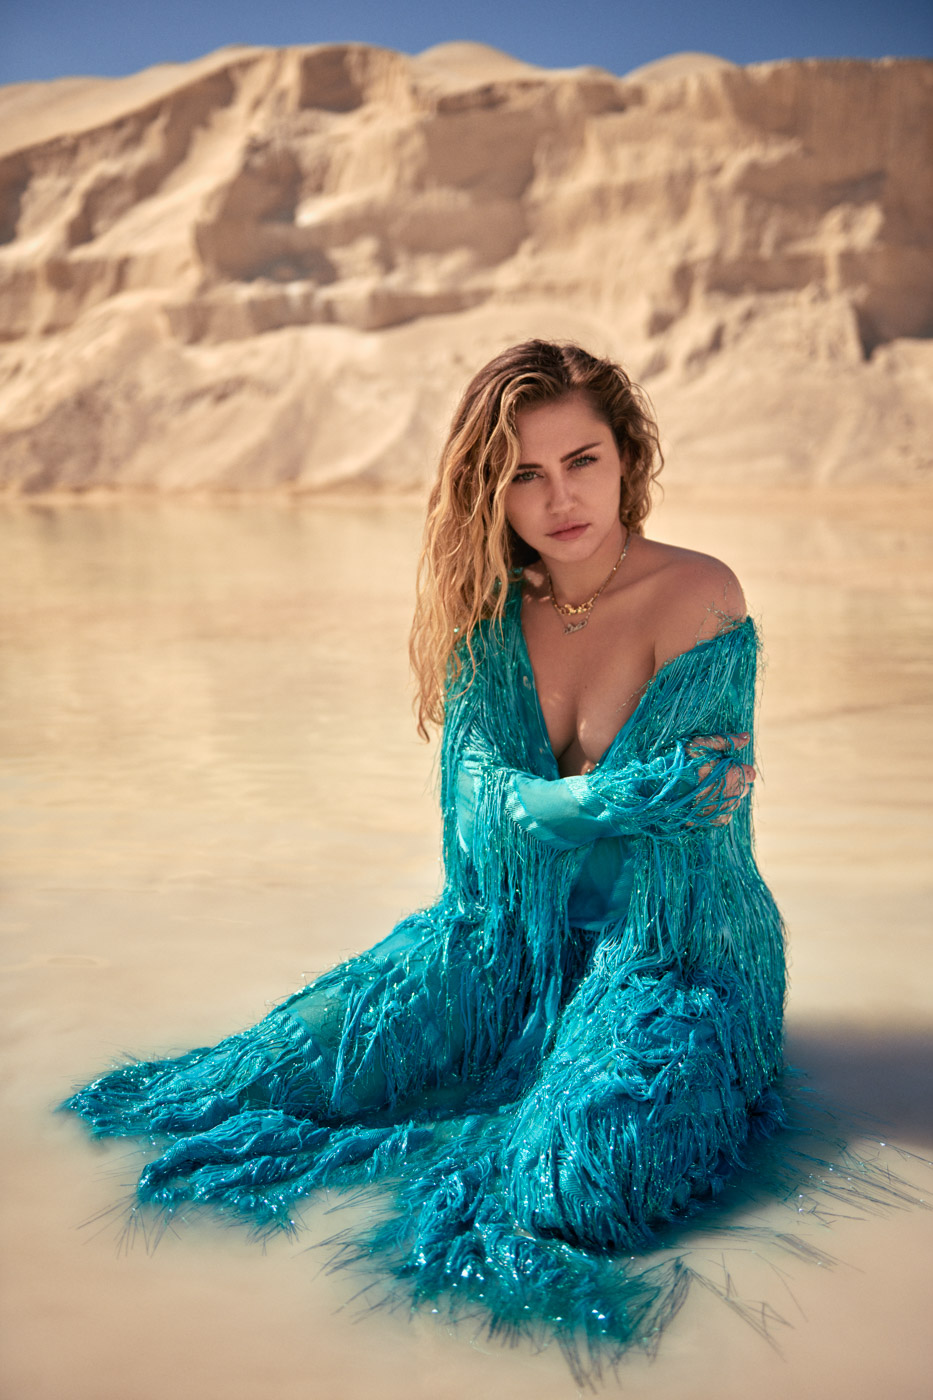  Miley Cyrus, Vanity Fair, Spring Style Issue, February 21, 2019. 